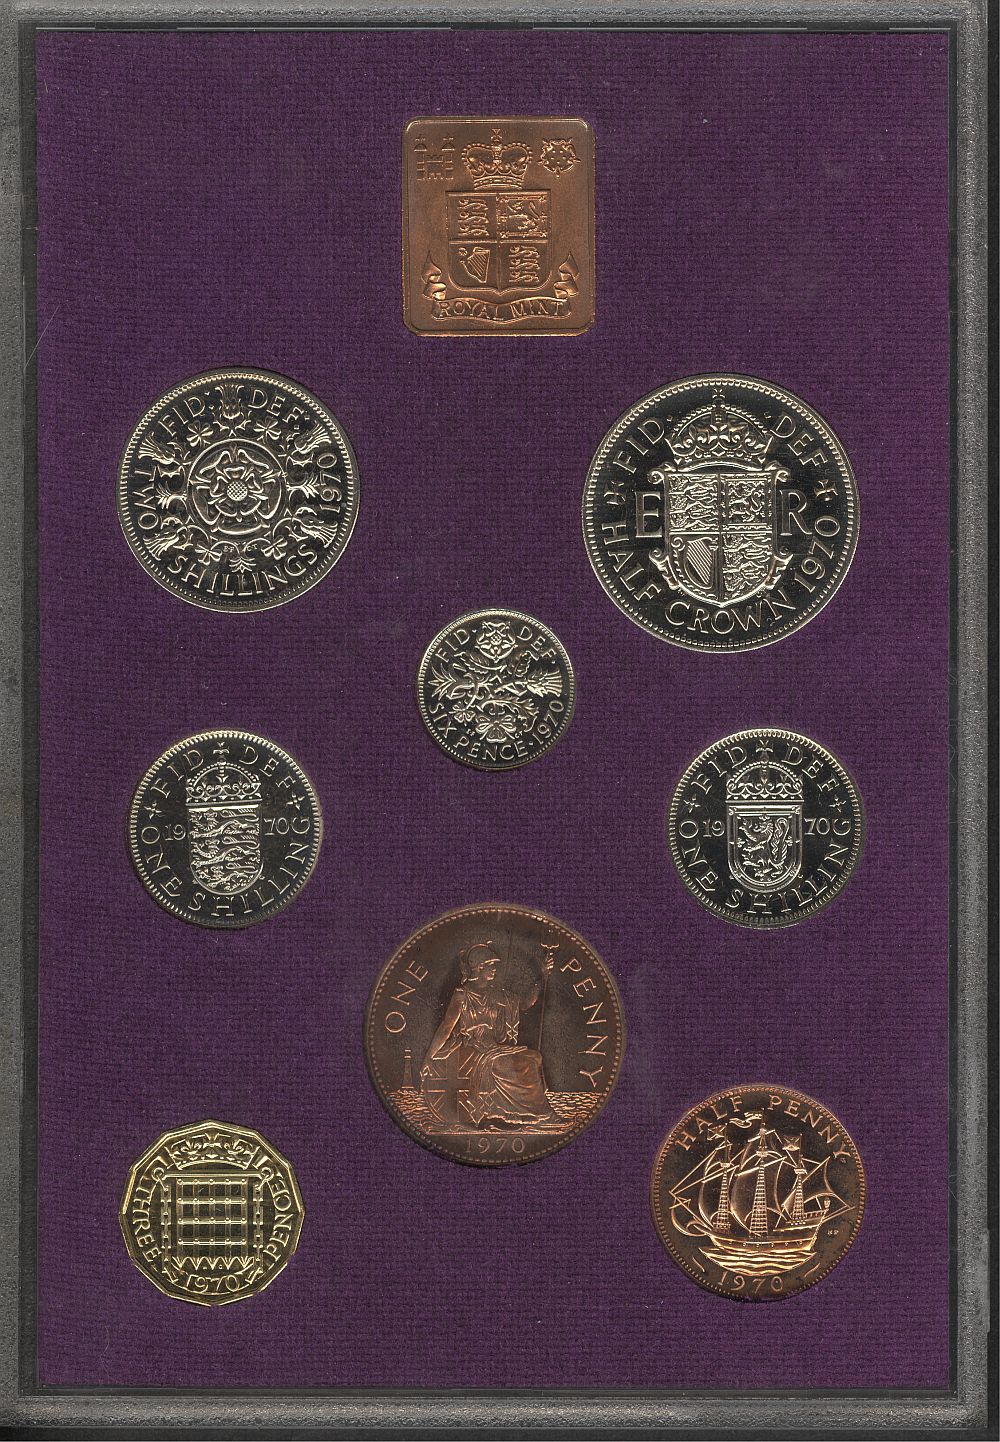 Details about   1981 Coinage of Great Britain & Northern Ireland Proof Set 